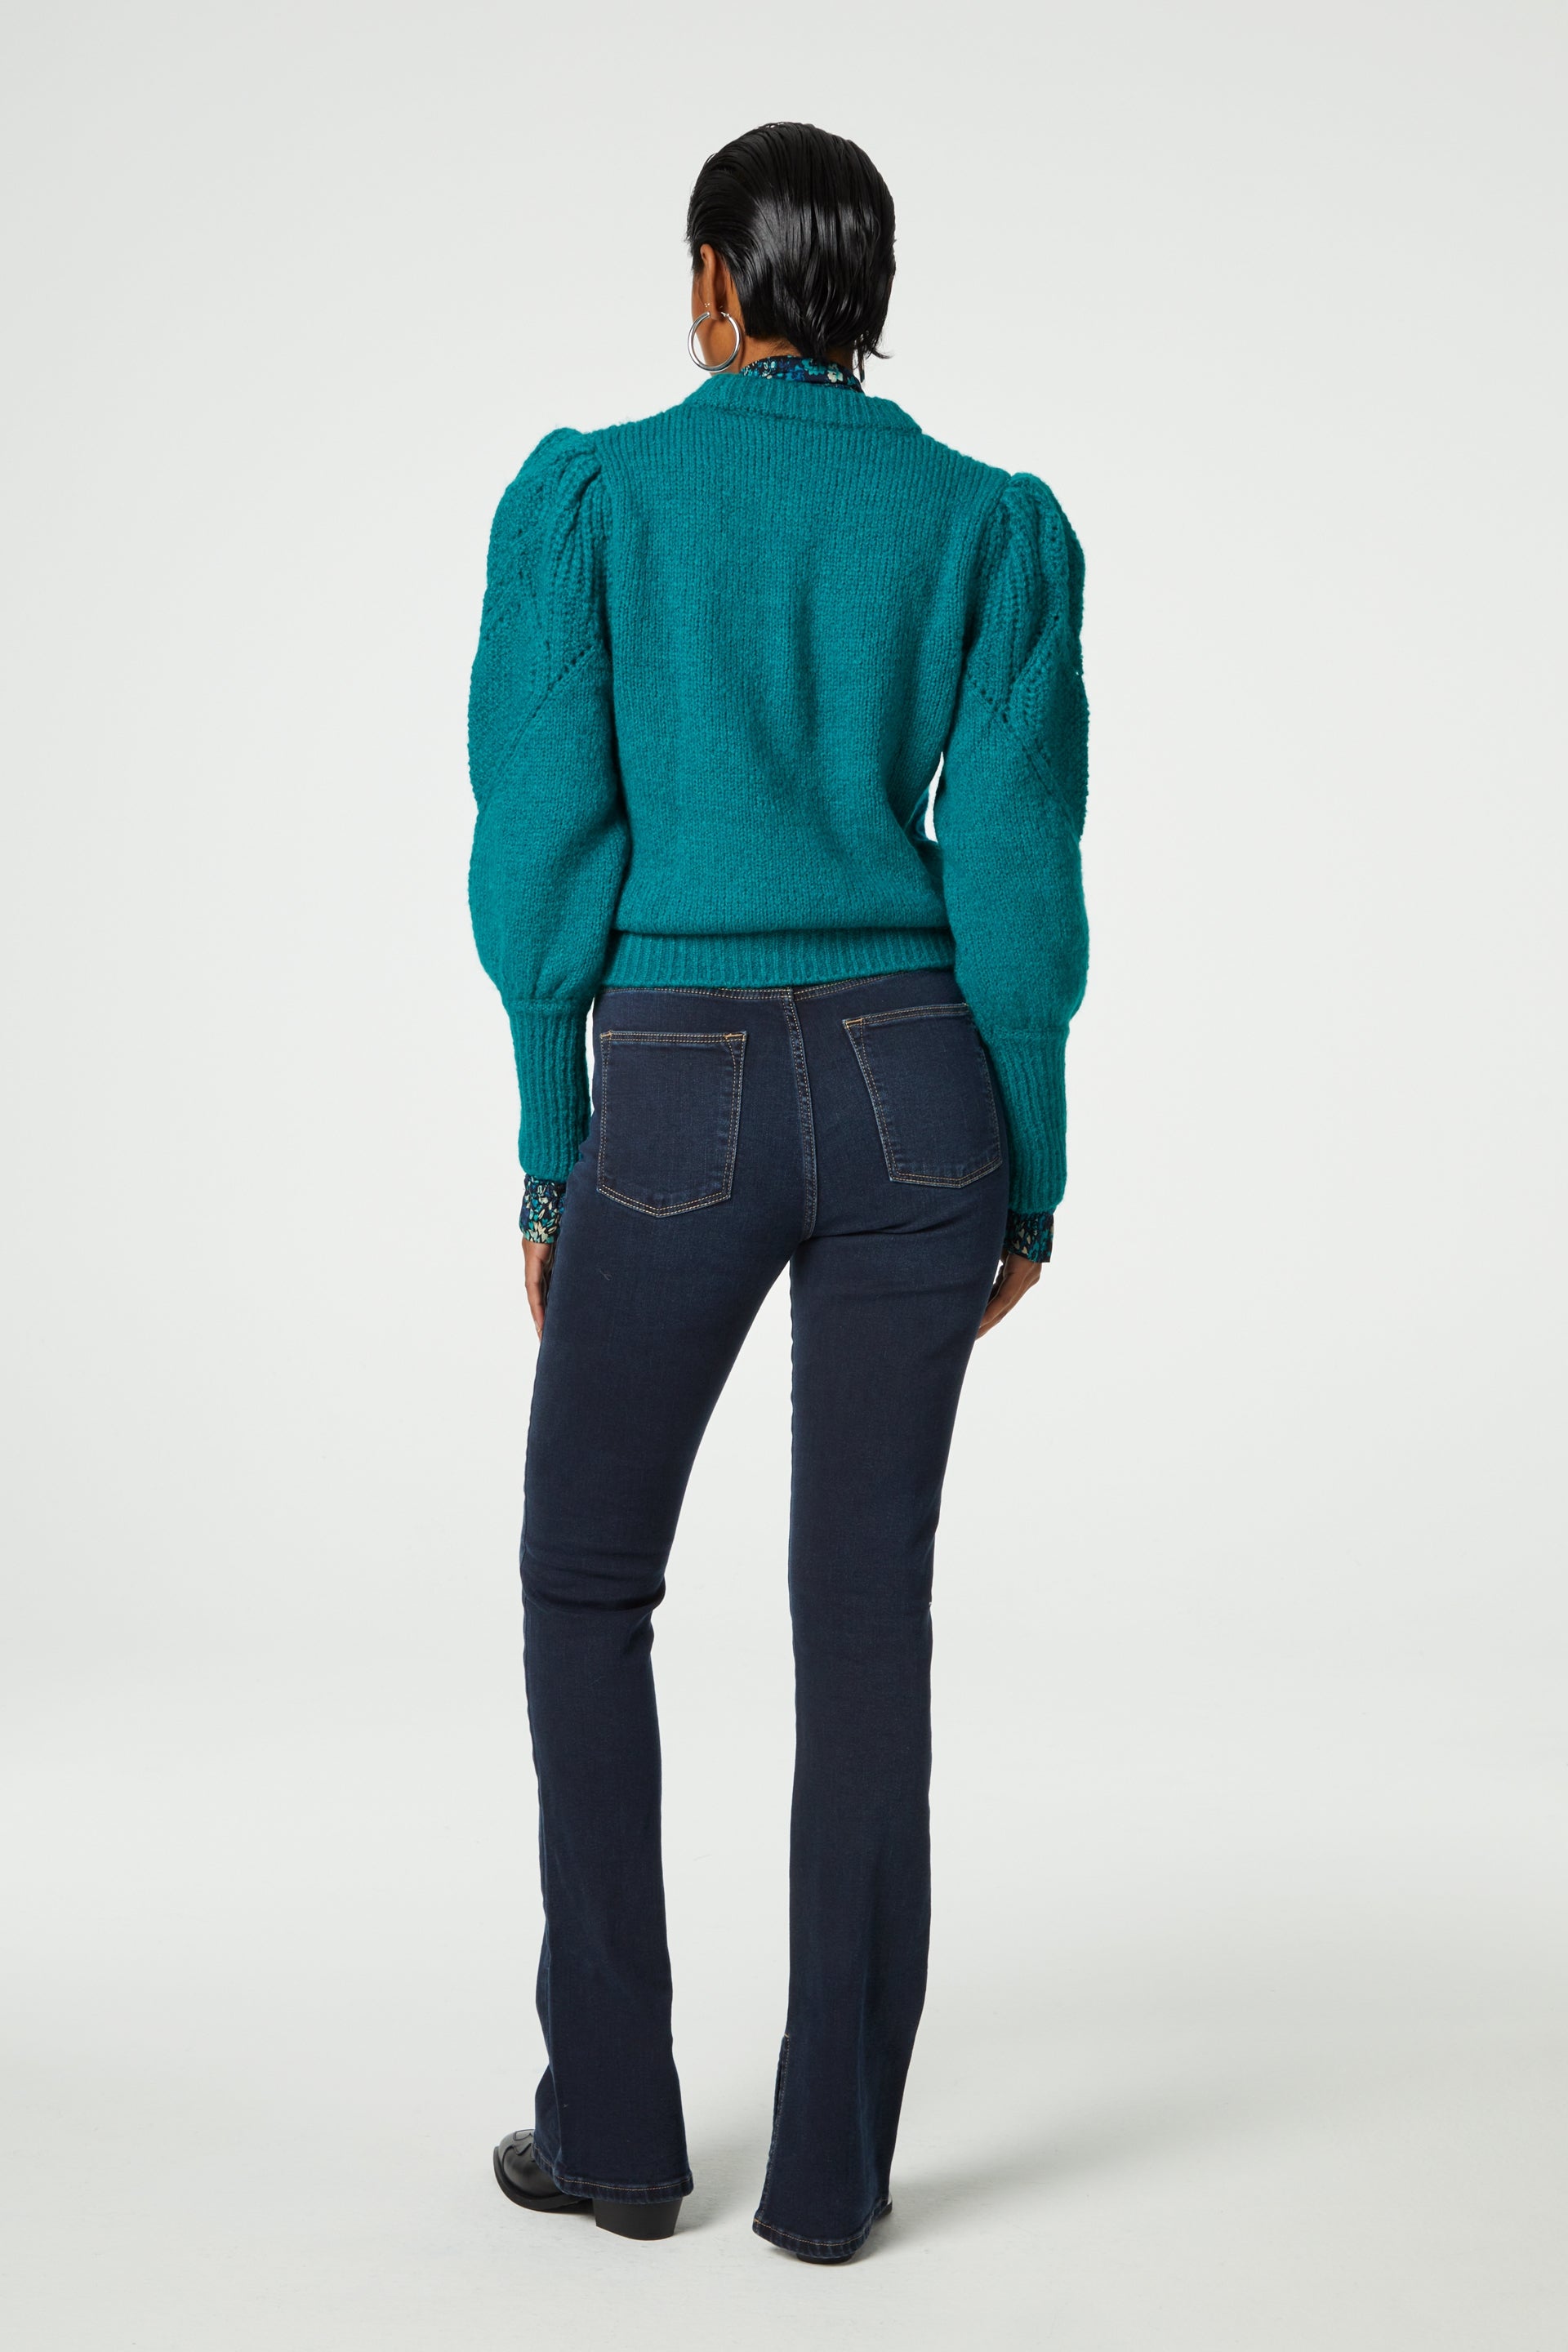 Cathy Pullover | Keep it Teal